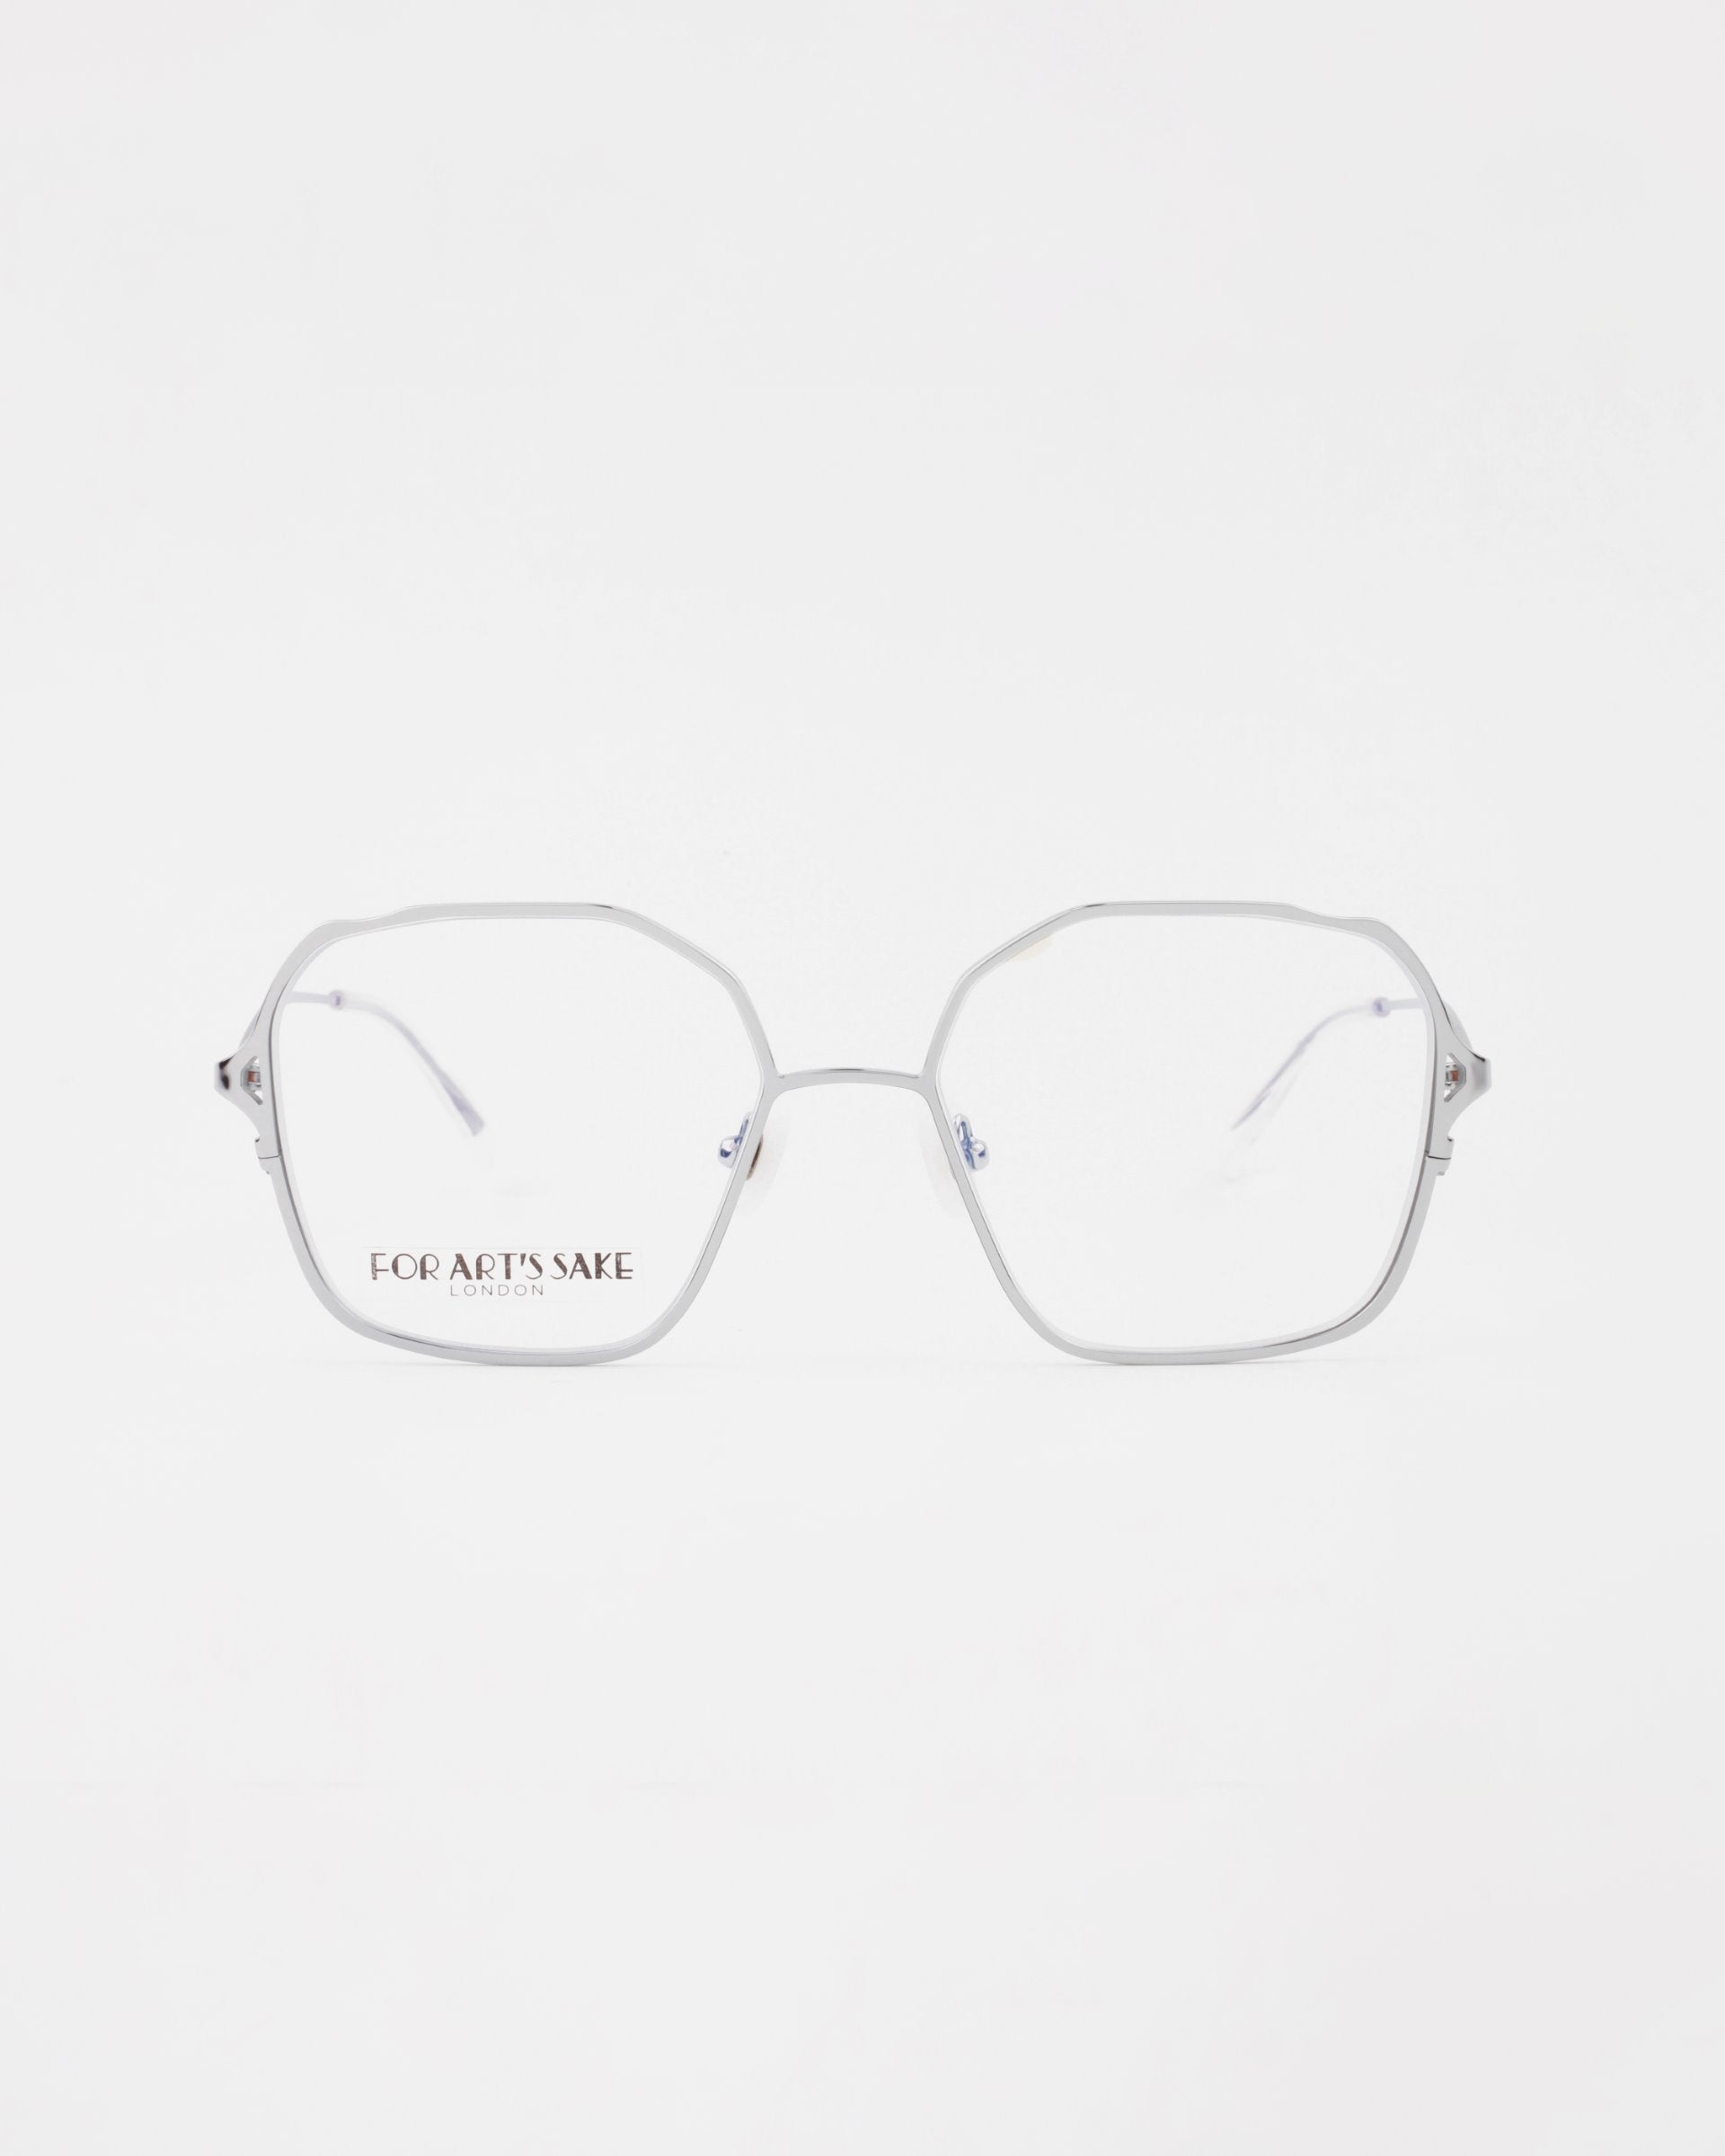 A pair of silver Mimi eyeglasses with octagonal frames and clear lenses, featuring an 18-karat gold-plated bridge, set against a plain white background. The brand name "FOR ART'S SAKE" is printed on the left lens in black letters. The glasses are available with a prescription service.